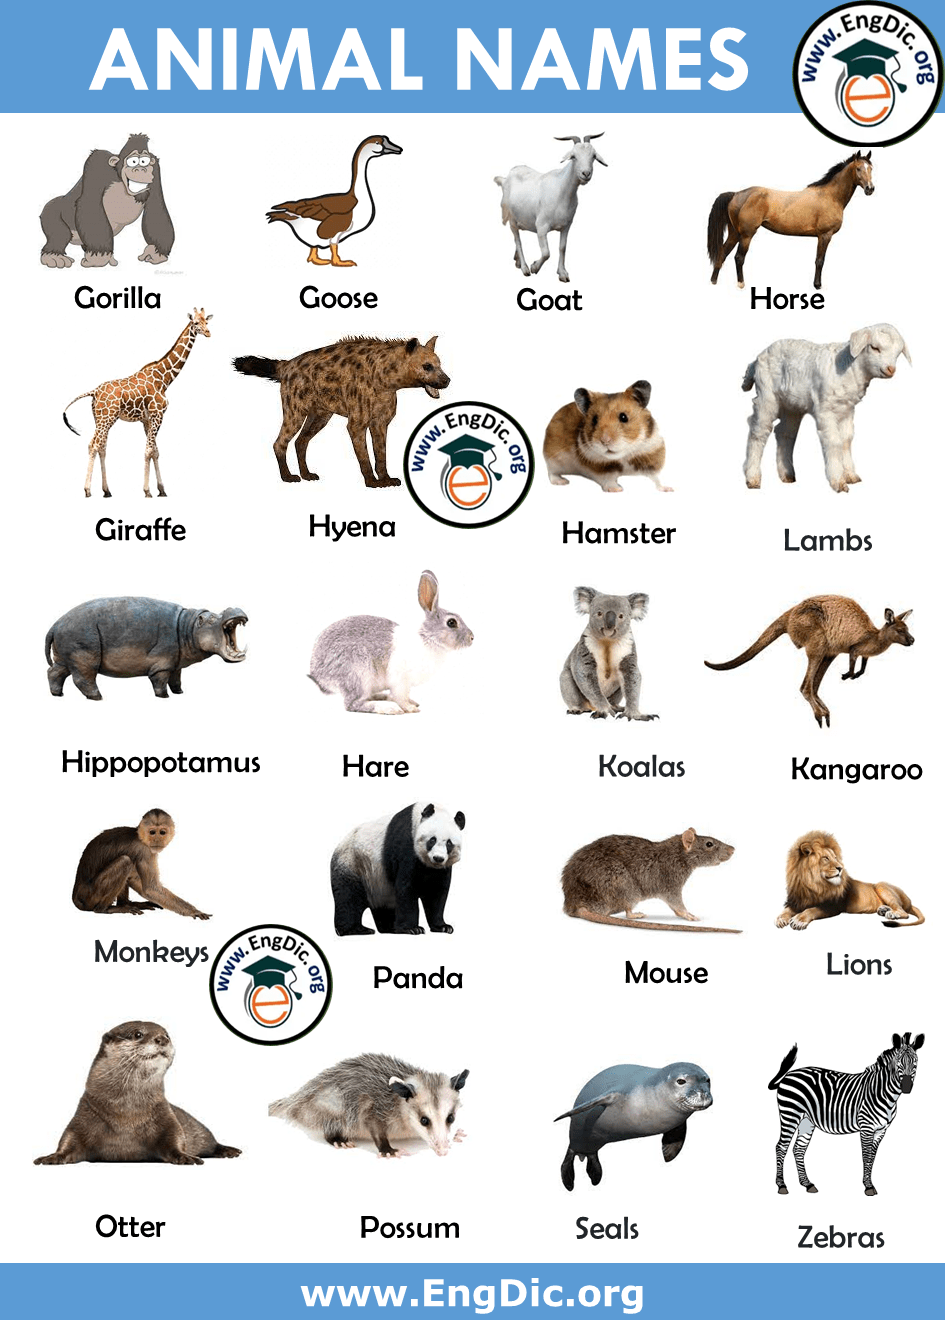 25+ Animals Name List in English A to Z   Pictures and PDF   EngDic